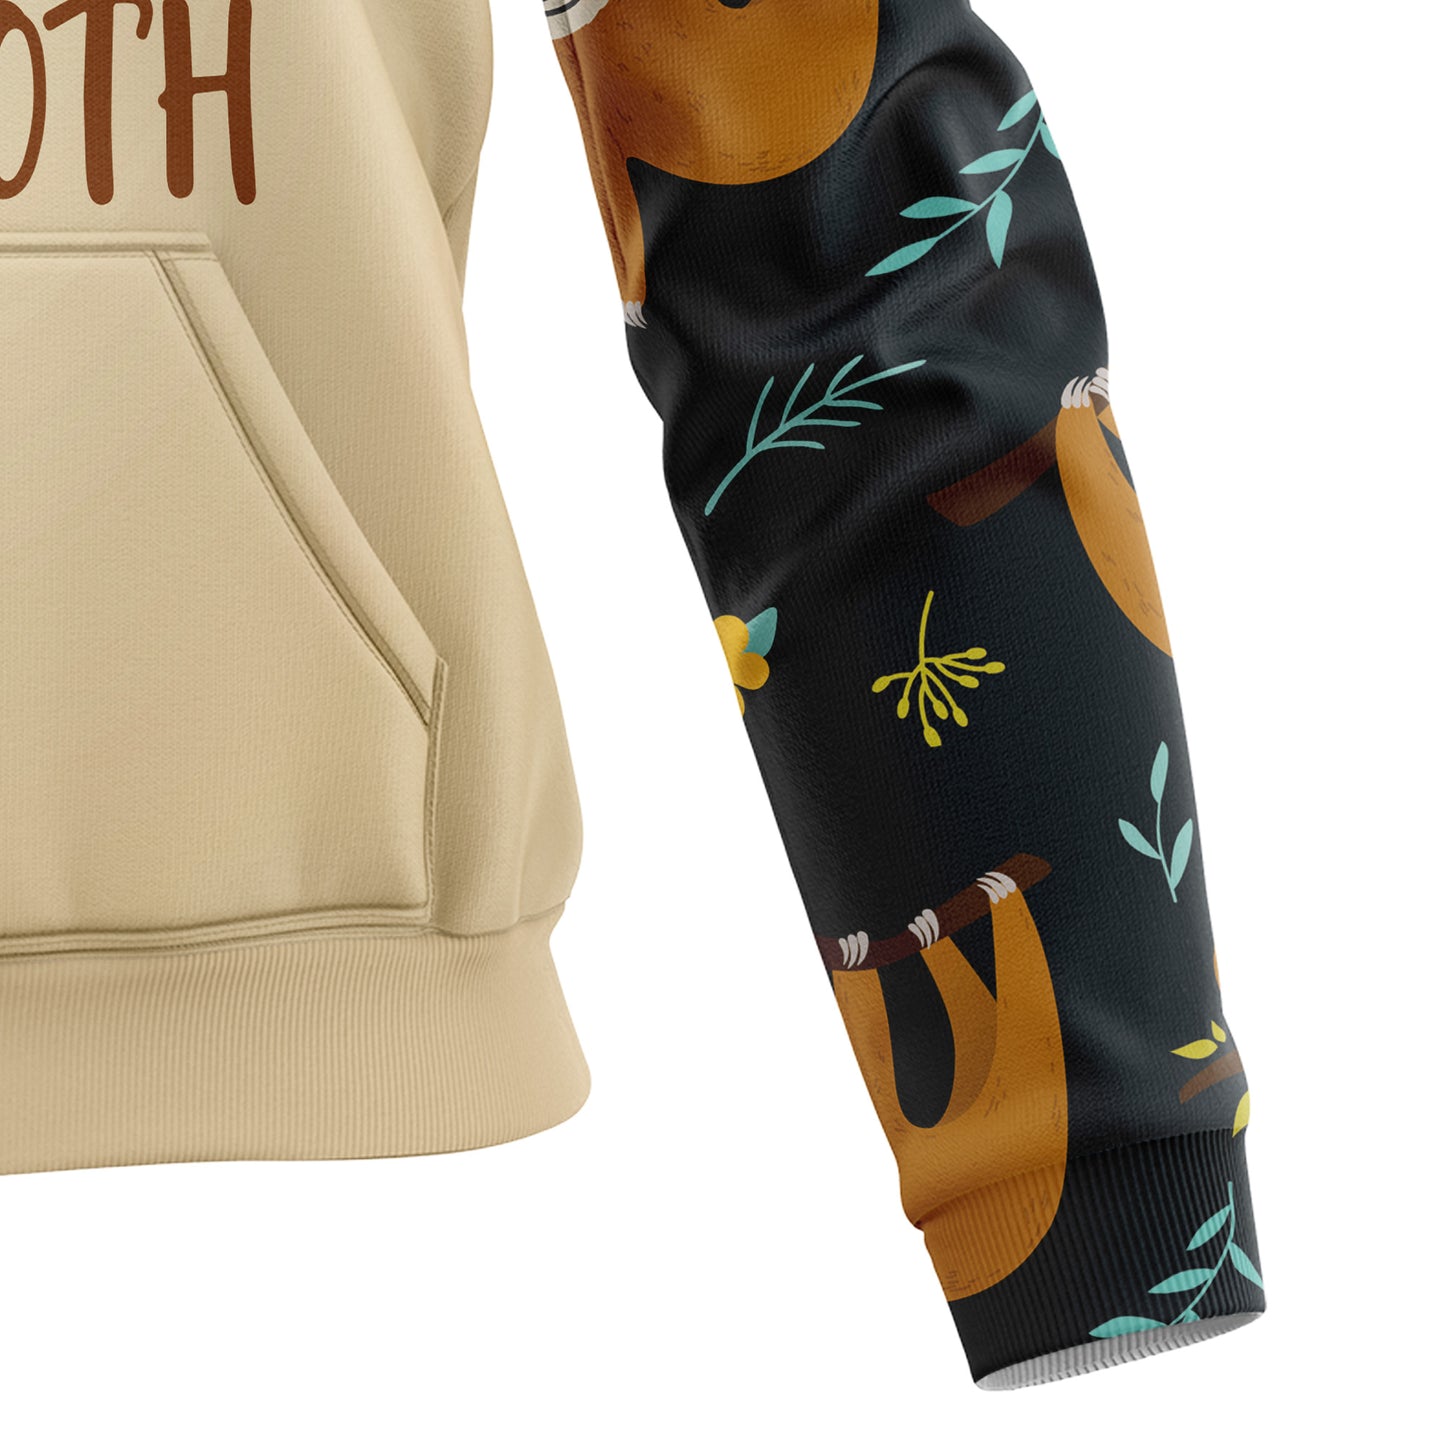 Amazing Sloth HT06809 All Over Print Unisex Hoodie